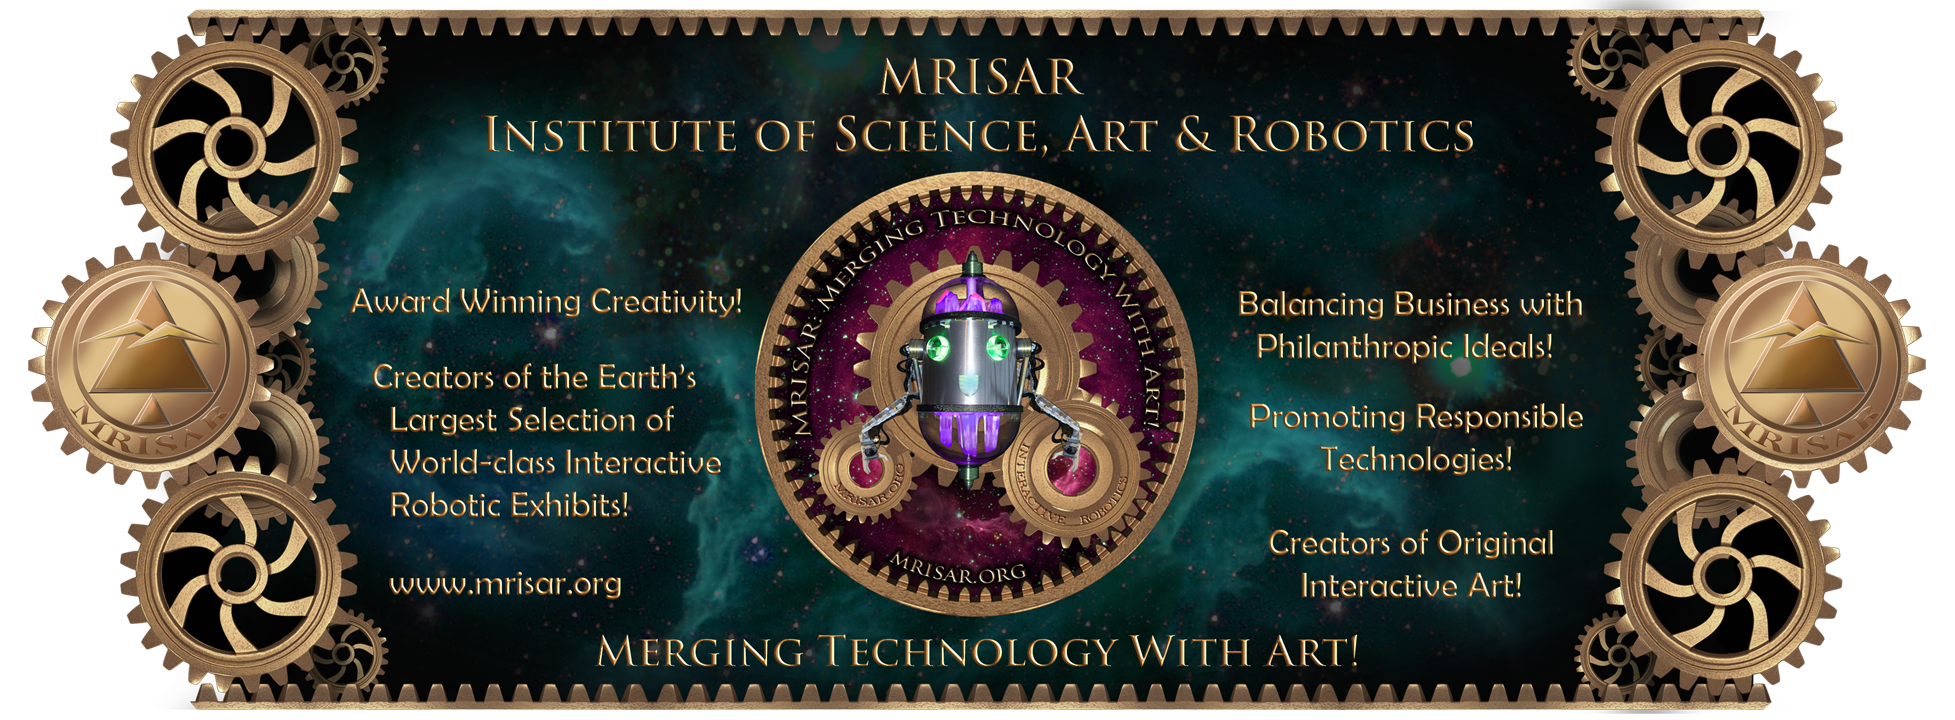 MRISAR, Institute of Science, Art & Robotics LLC; Merging Technology with Art. Creating International Robotics, Science & Art Exhibit Sales & Rentals to fund our own Philanthropic R&D and Programs!